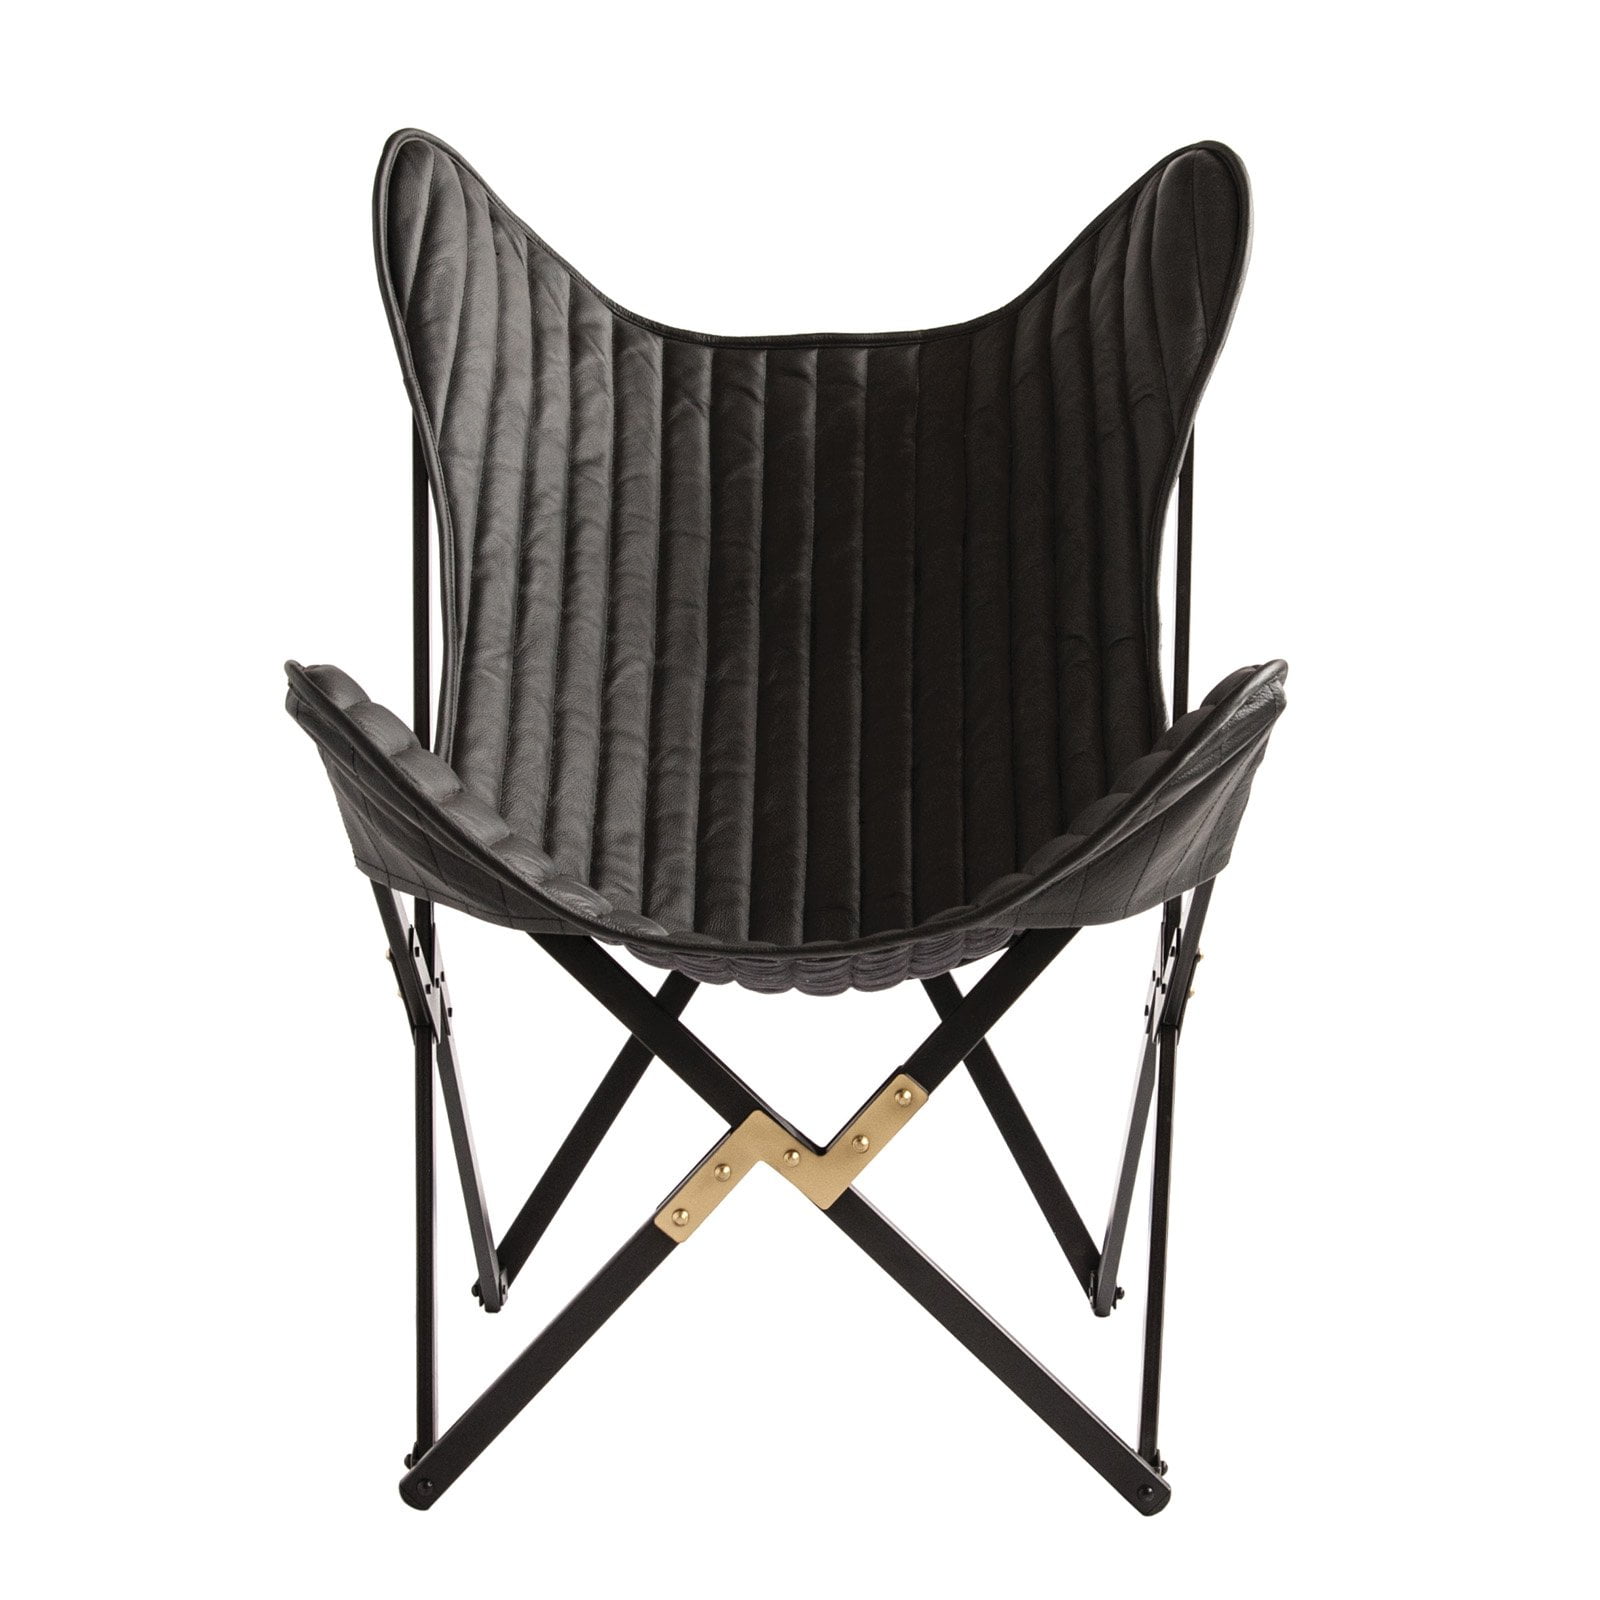 3R Studios Charcoal Dyed Leather Folding Butterfly Chair - Walmart.com